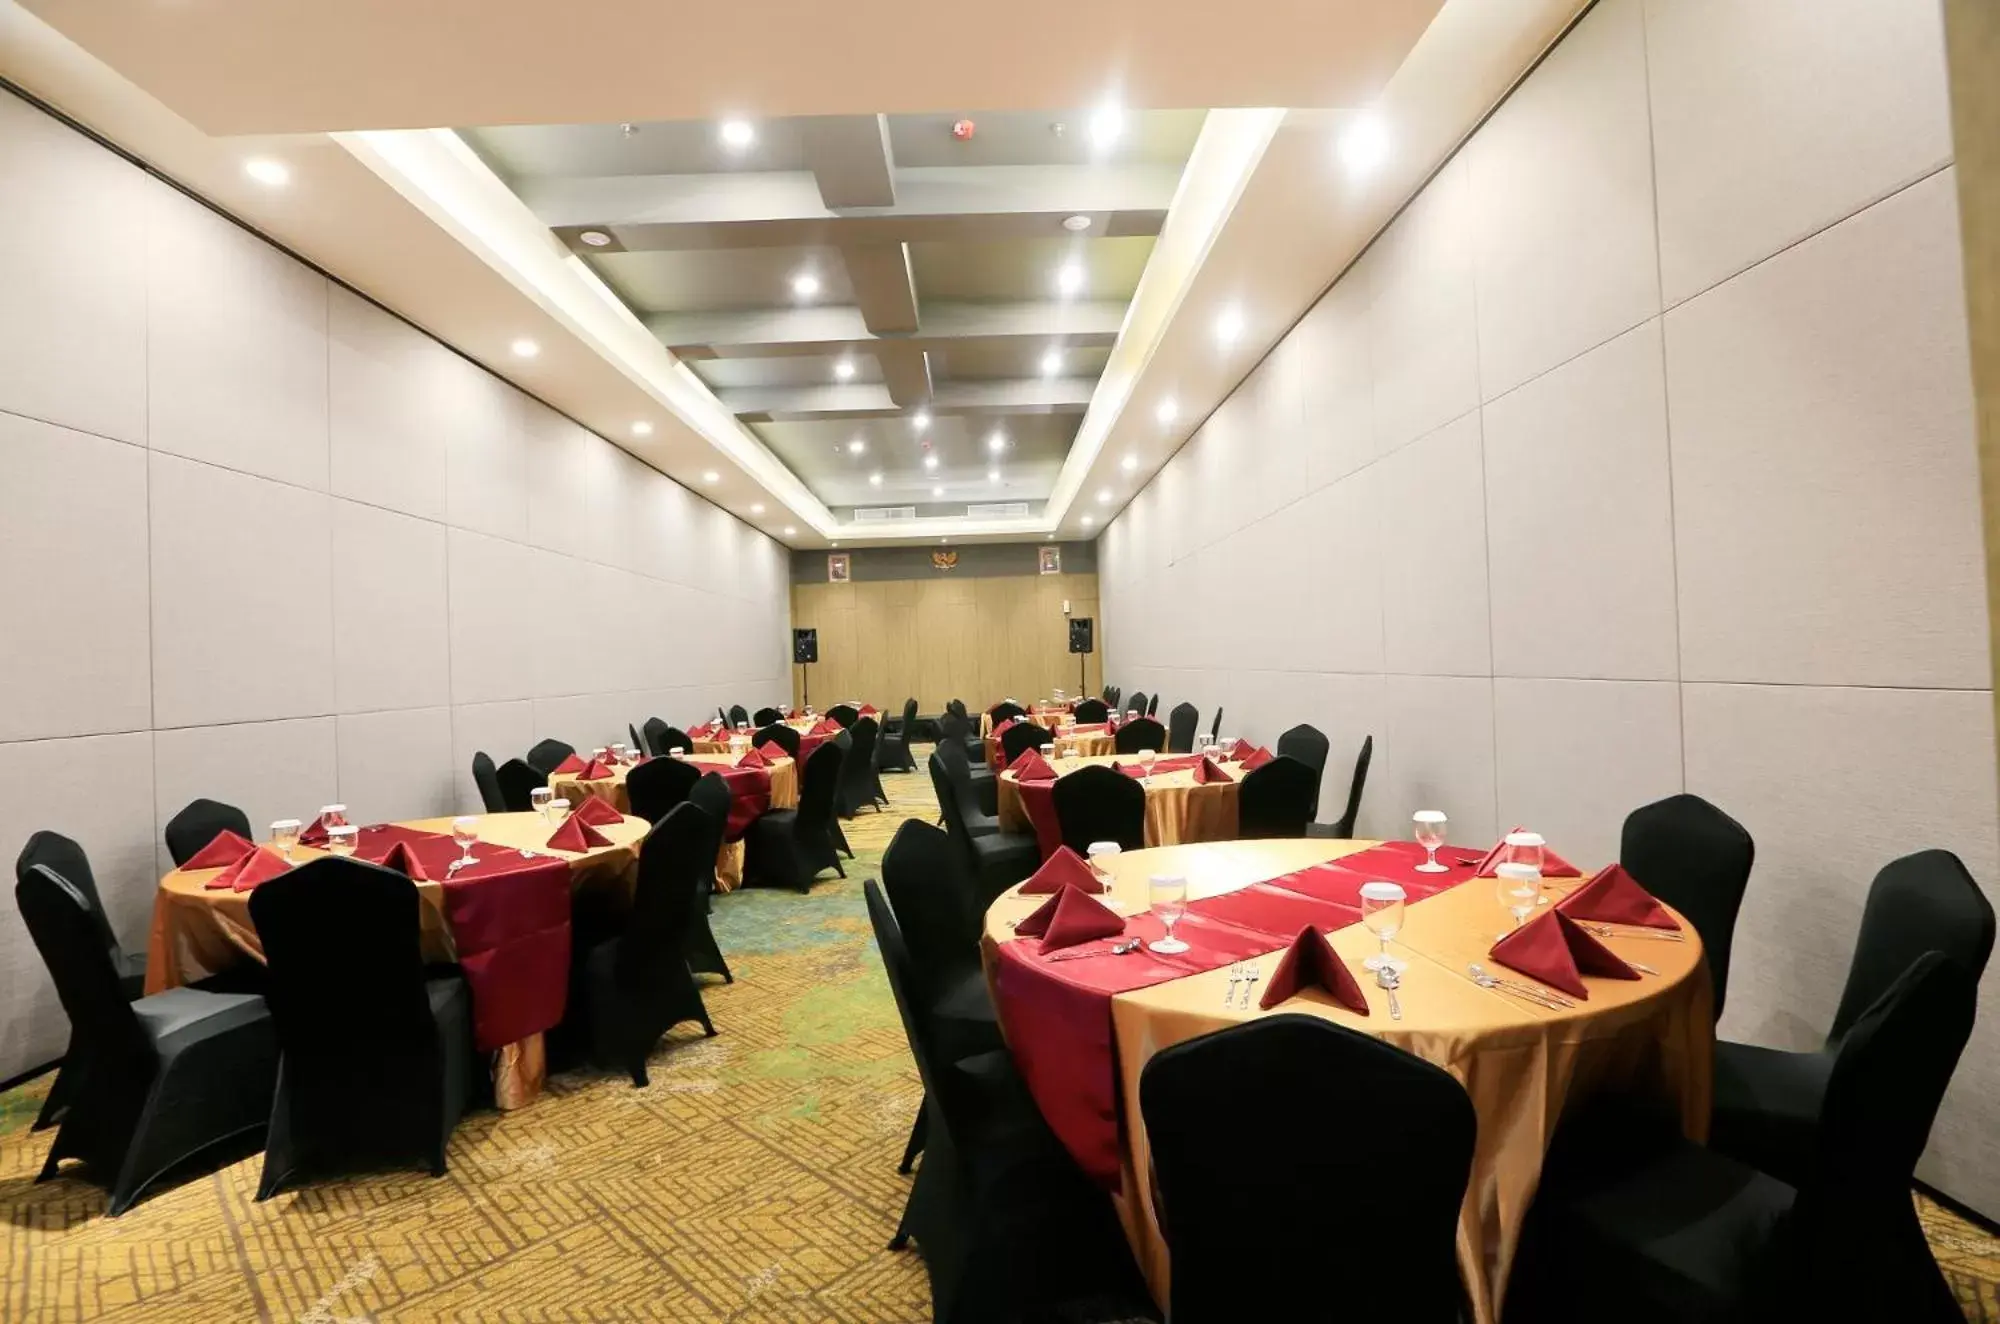 Meeting/conference room, Banquet Facilities in Luminor Hotel Purwokerto By WH